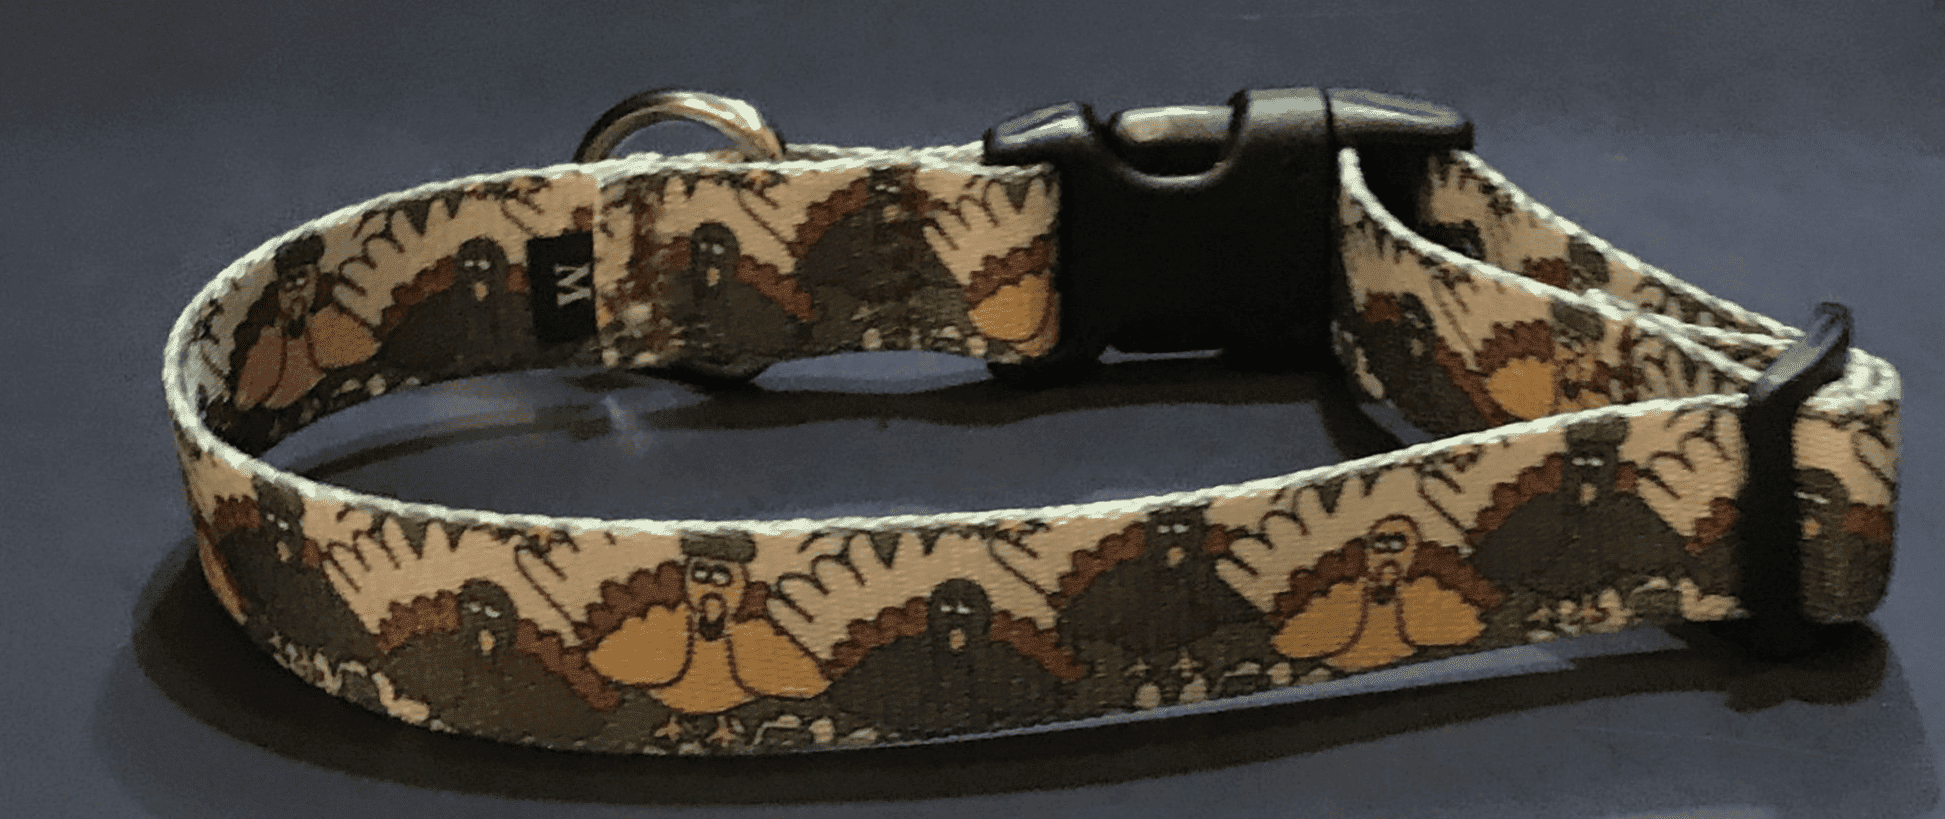 Turkey Day Dog Collars or Leads (1"Wide).